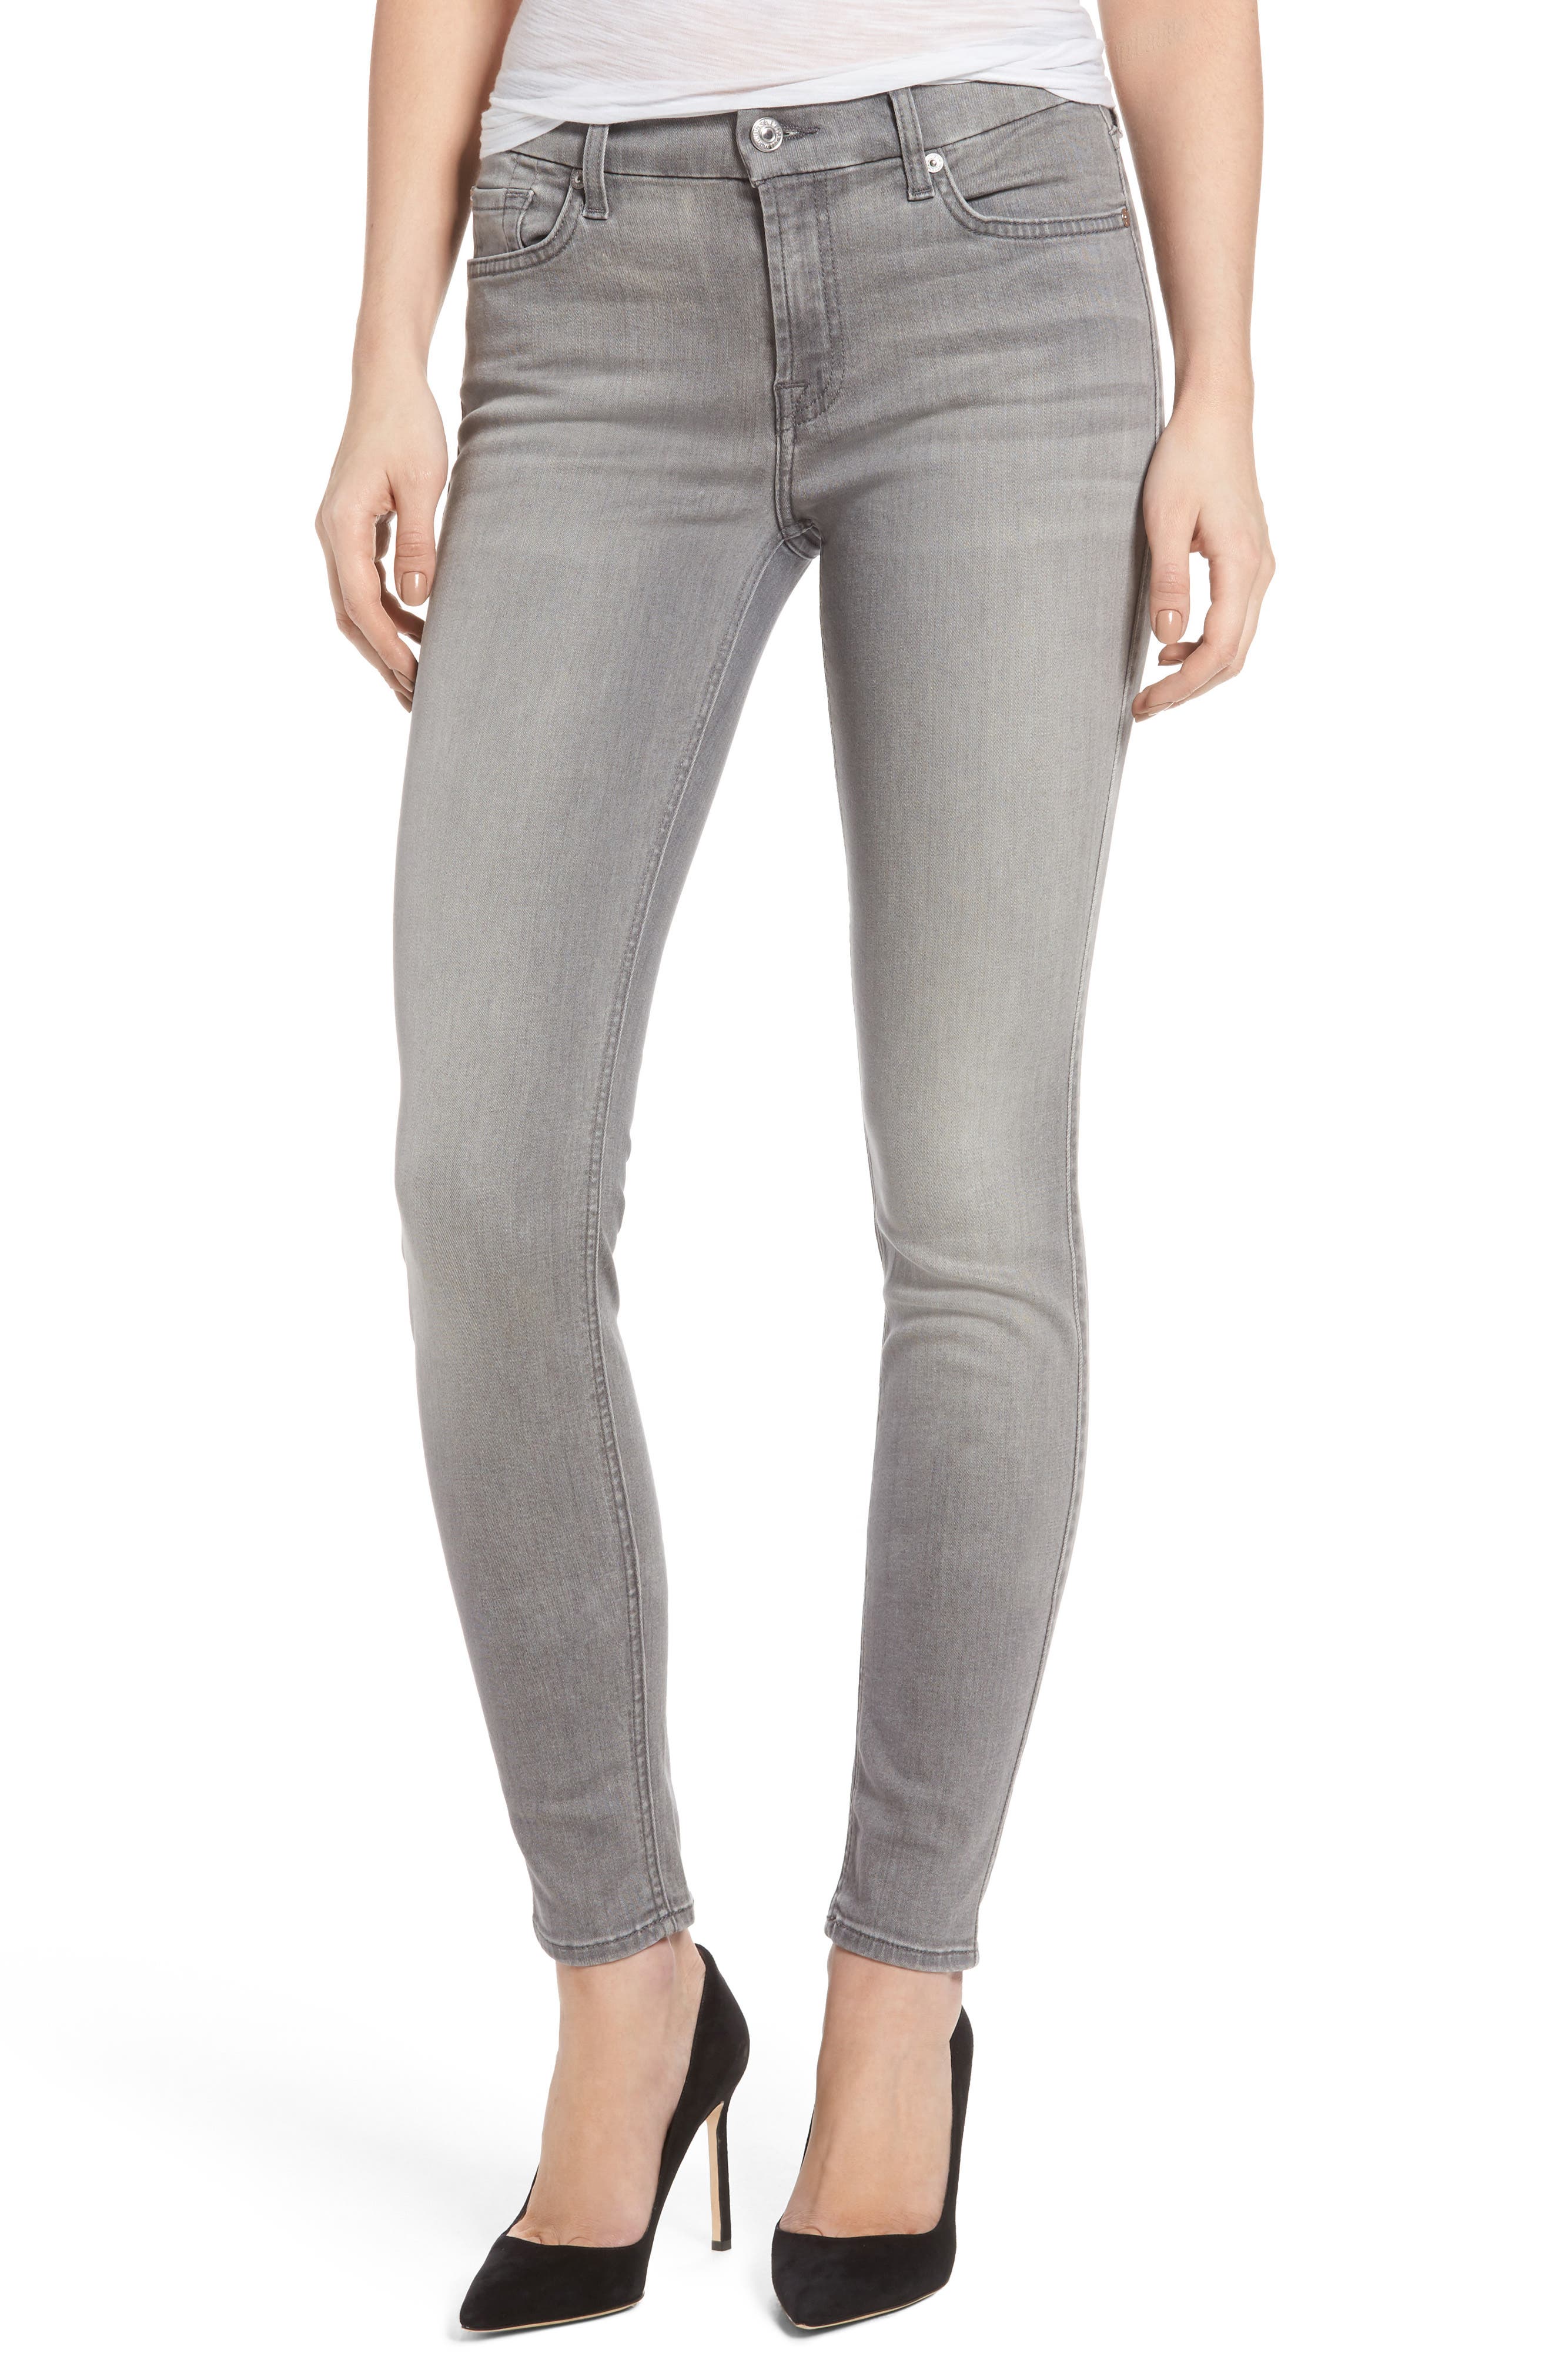 7 for all mankind bair skinny jeans